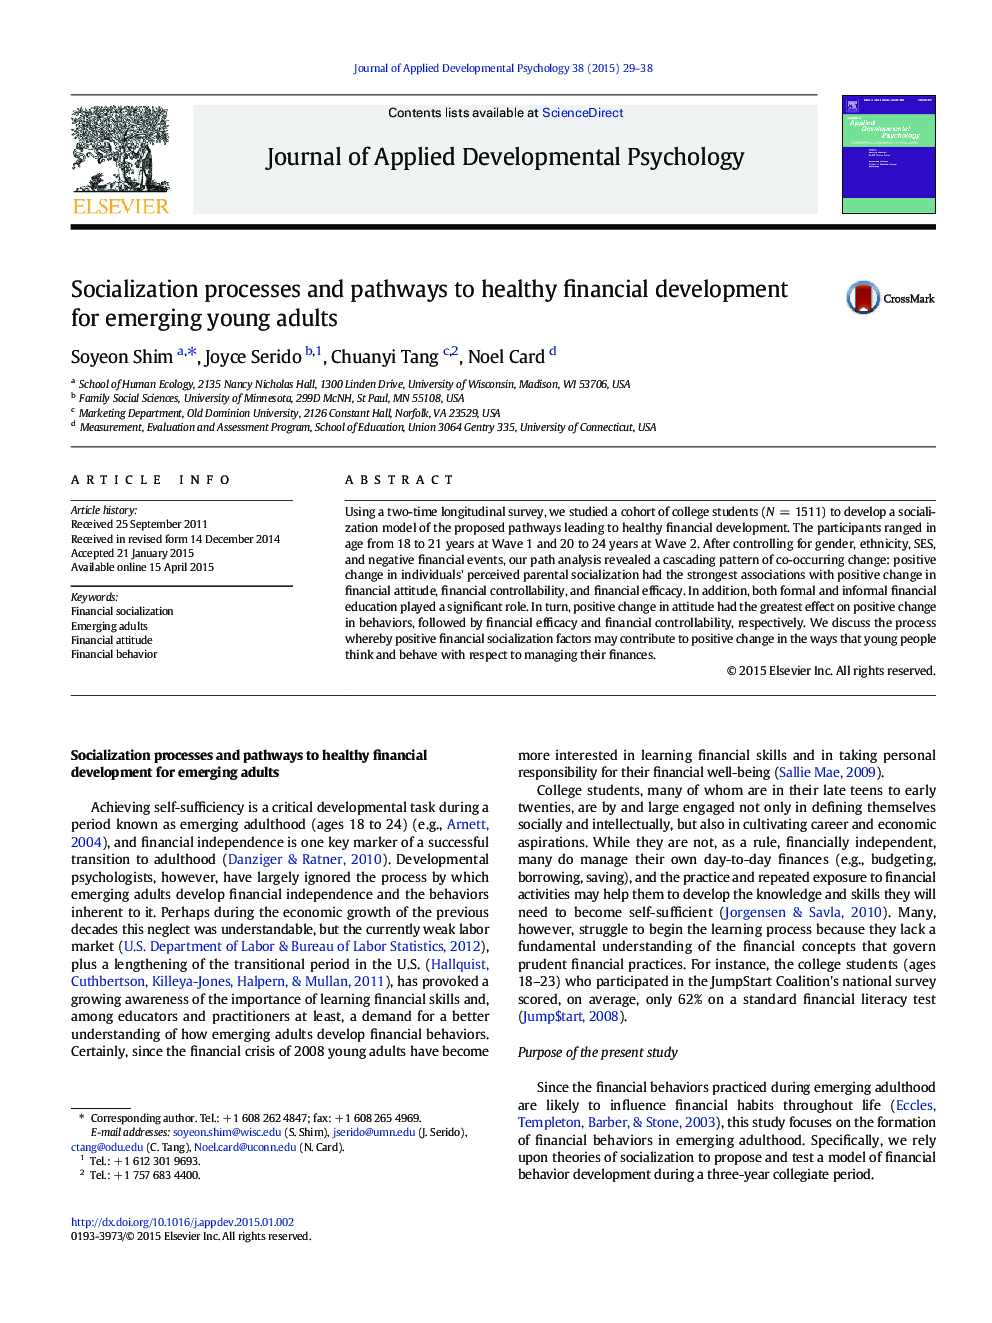 Socialization processes and pathways to healthy financial development for emerging young adults